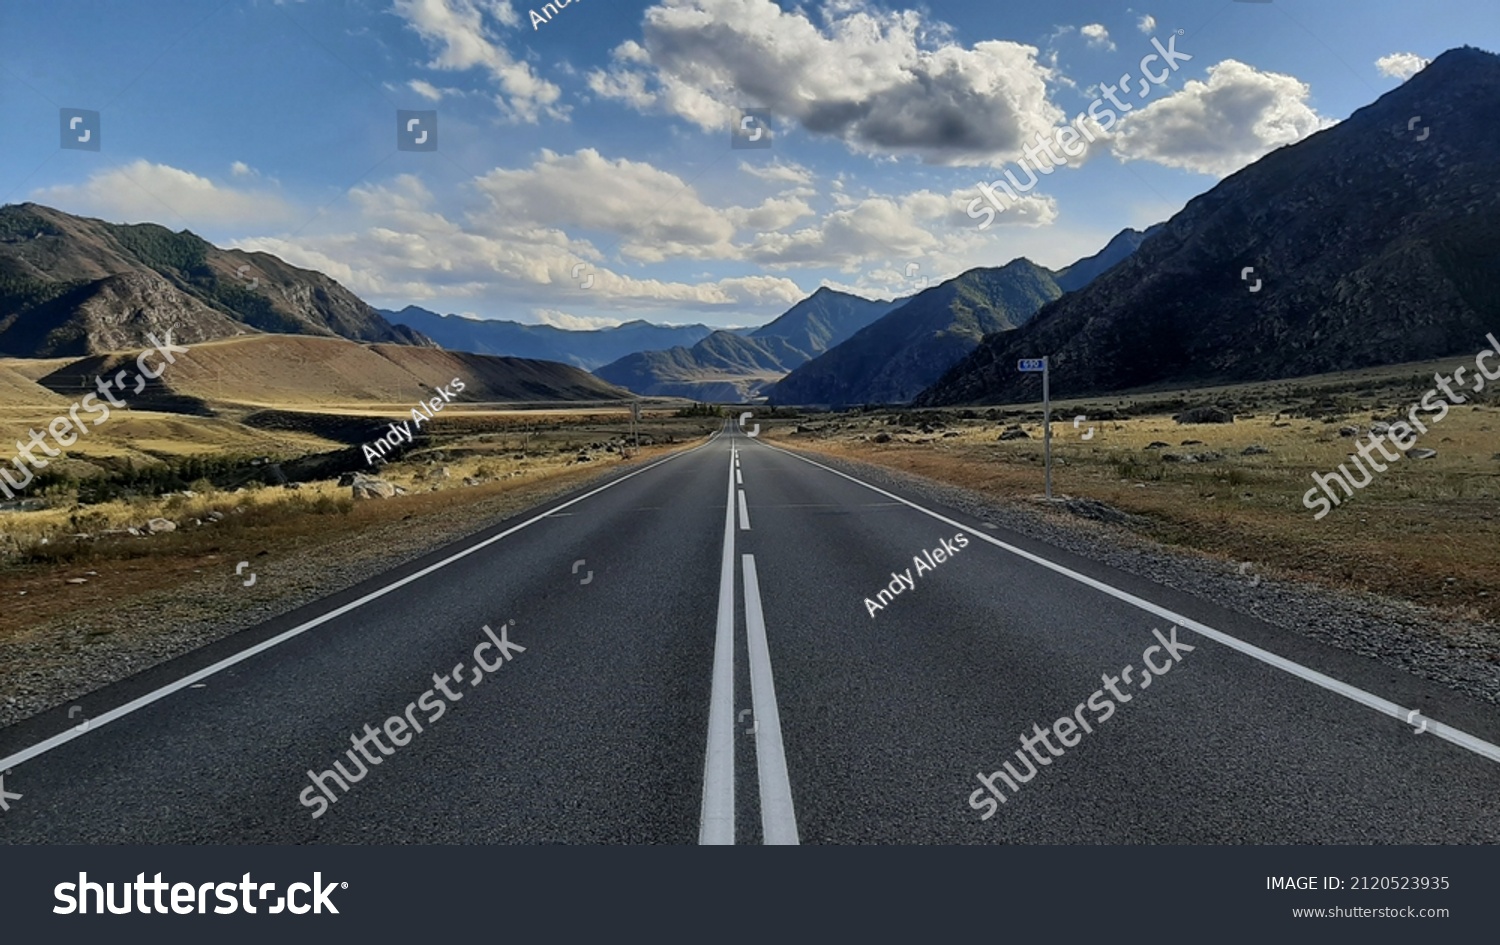 beautiful view of the paved road with road markings running in a mountainous area on a sunny autumn day #2120523935